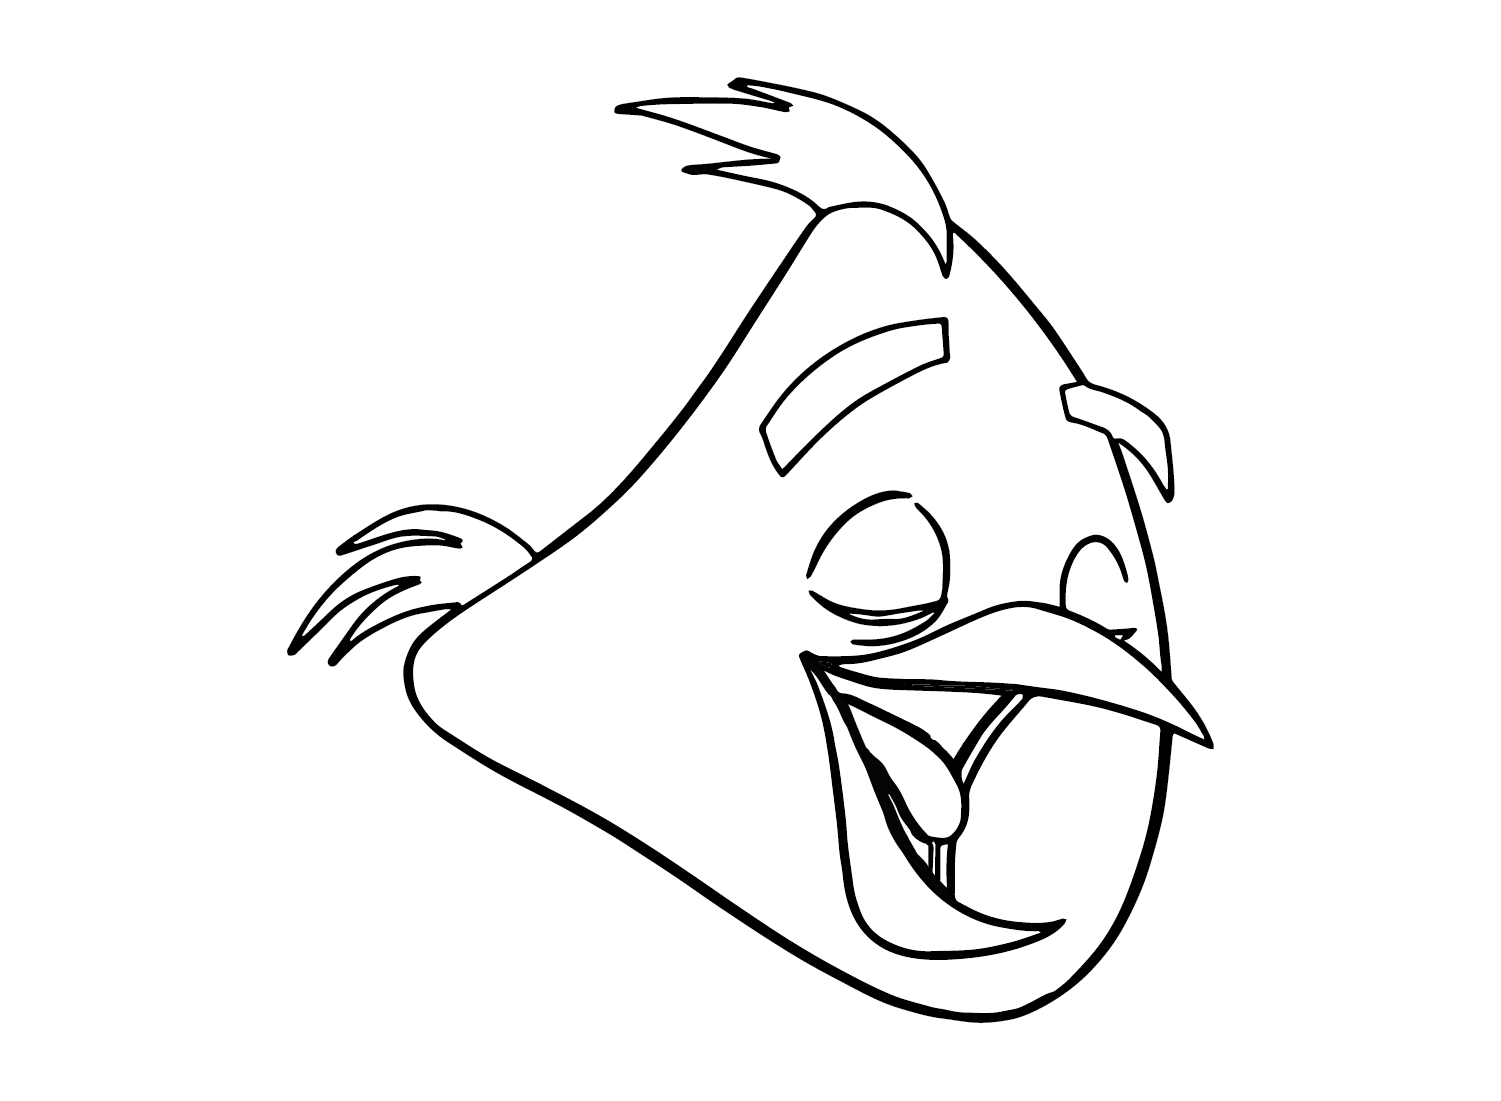 Chuck (Angry Bird) color Sheets Coloring Page